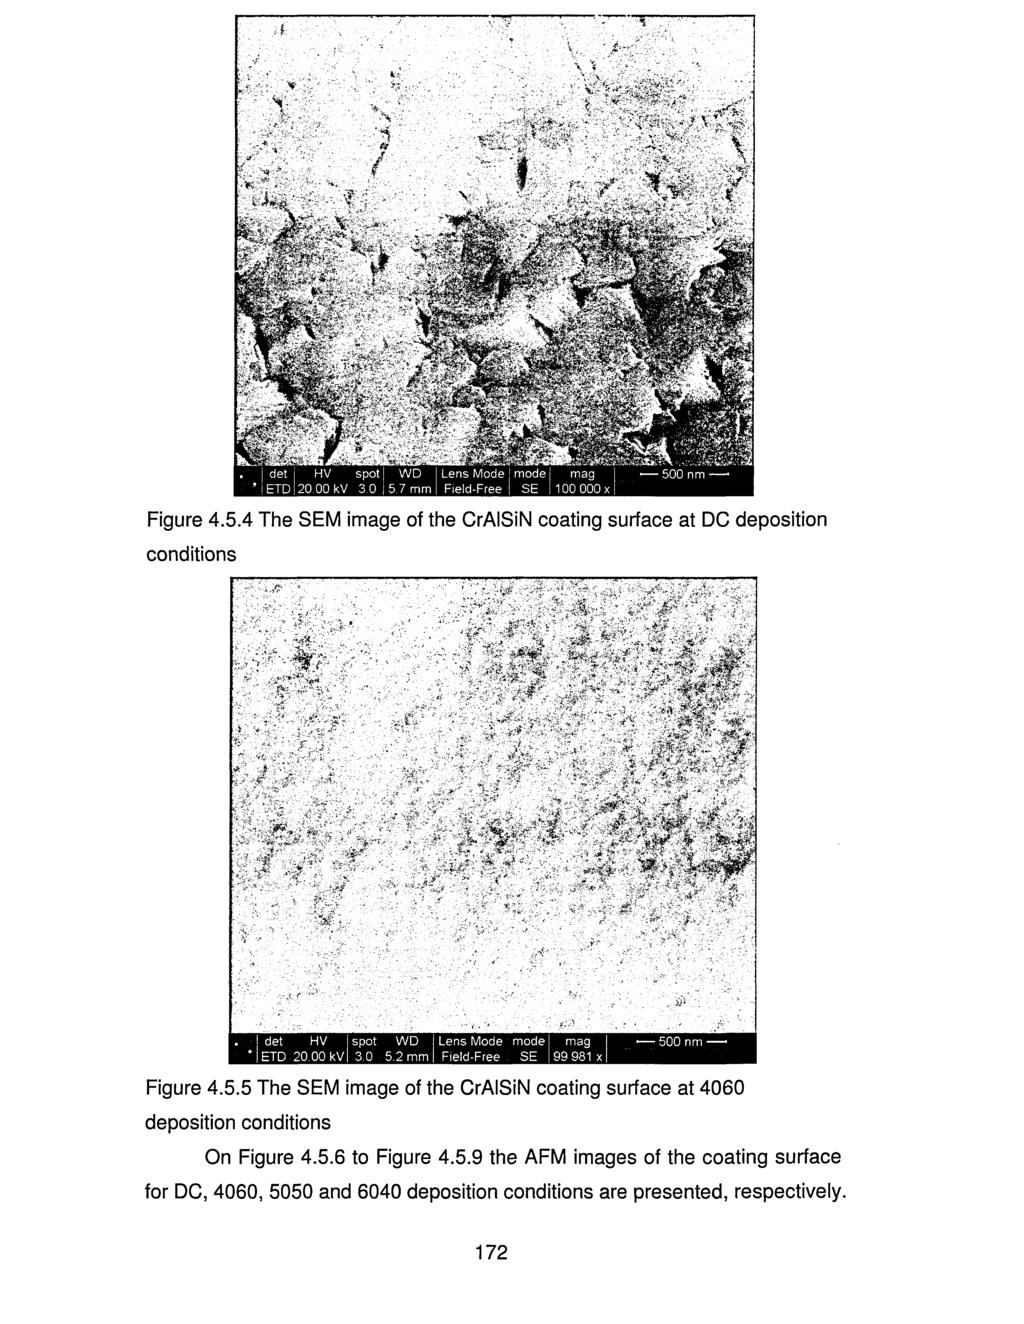 Figure 4.5.4 The SEM image of the CrAISiN coating surface at DC deposition conditions Figure 4.5.5 The SEM image of the CrAISiN coating surface at 4060 deposition conditions On Figure 4.